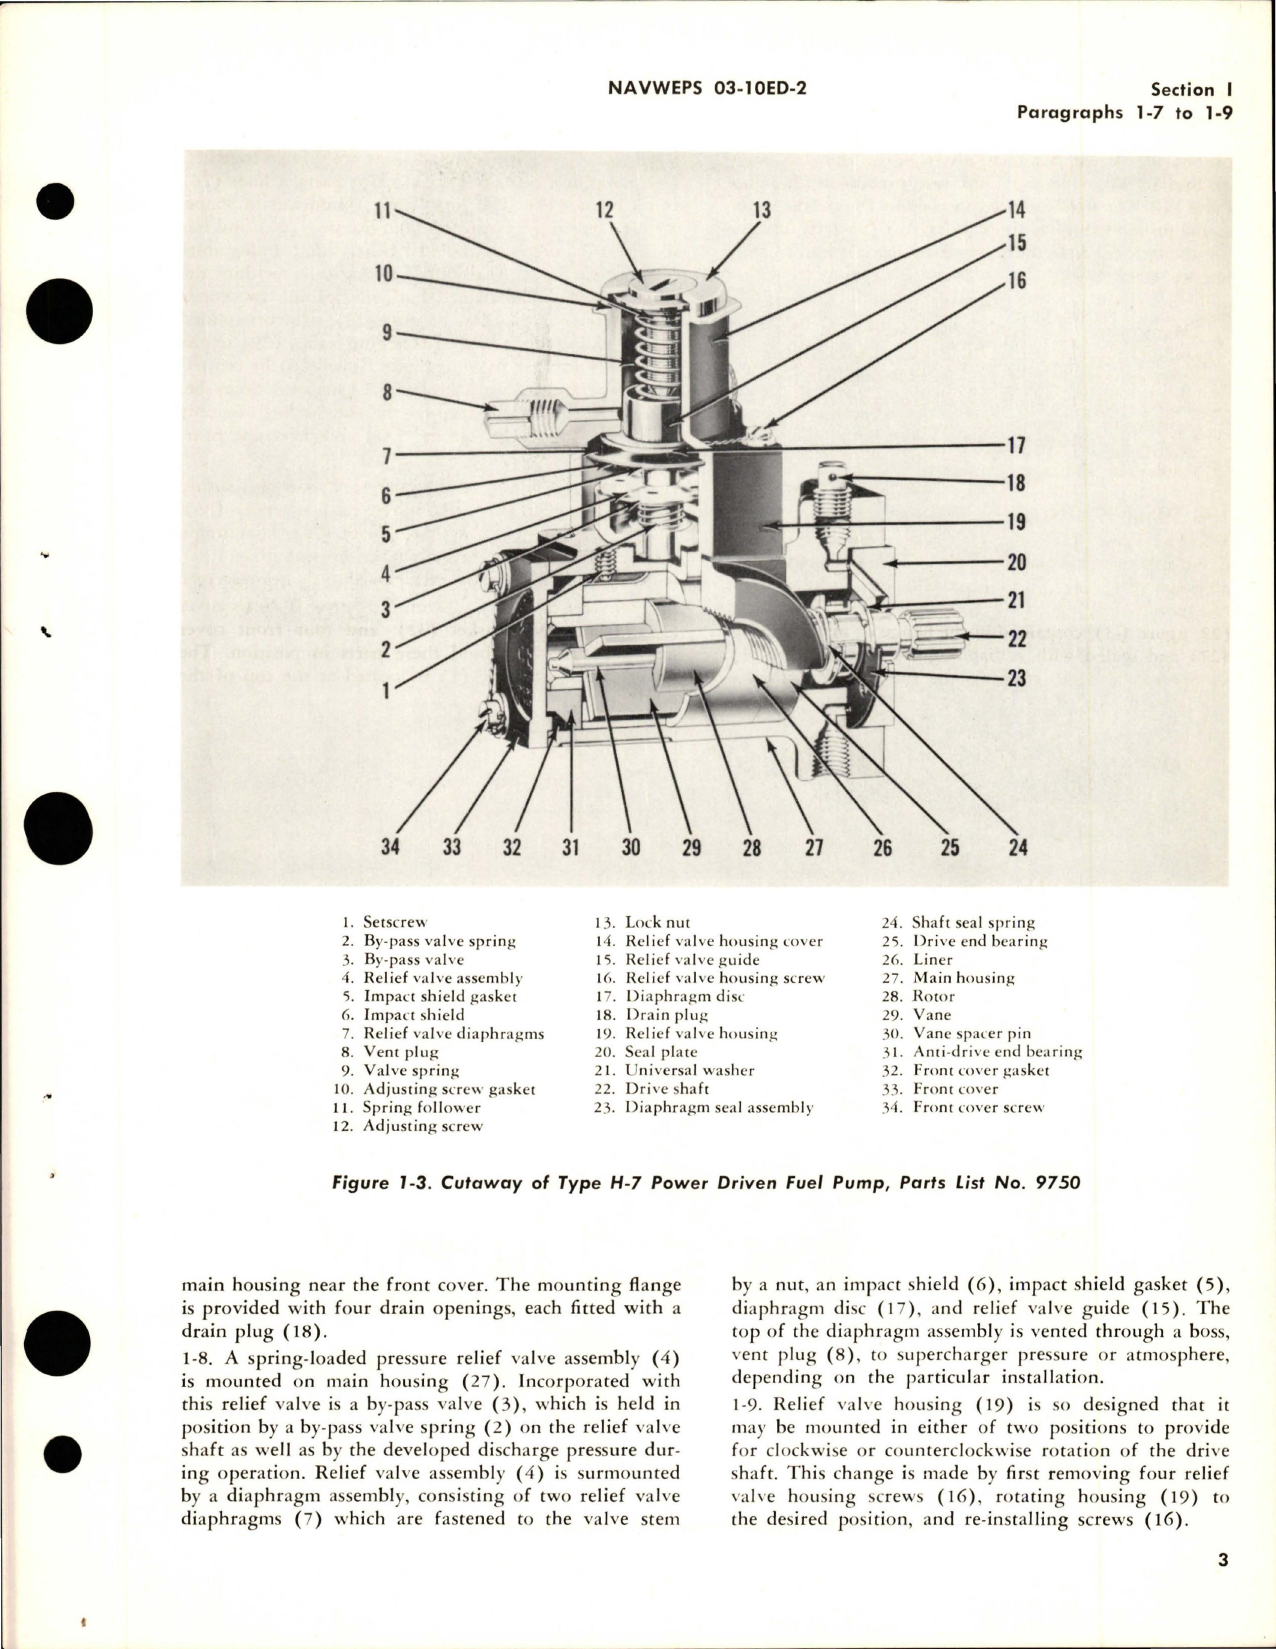 Sample page 7 from AirCorps Library document: Overhaul Instructions for Fuel and Water Pumps - Types F-10, H-2, H-4, and H-7